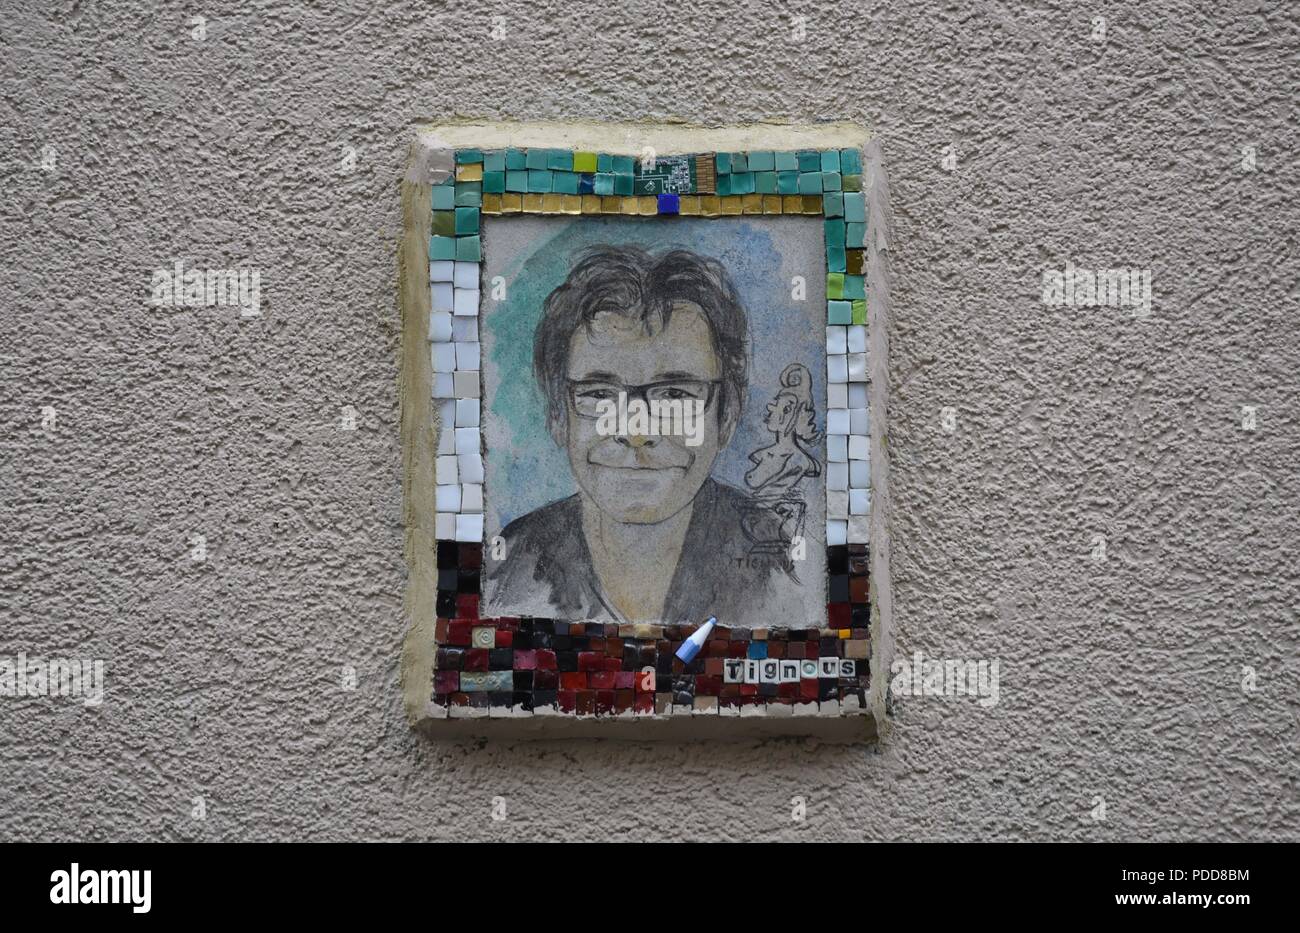 January 6, 2016 - Paris, France: Mural of Tignous, one of the Charlie Hebdo cartoonist killed on January 7, 2015. This art tribute is located near the former office of the French satirical magazine. Commemoration de l'attentat contre Charlie Hebdo, un an apres l'attaque. *** FRANCE OUT / NO SALES TO FRENCH MEDIA *** Stock Photo